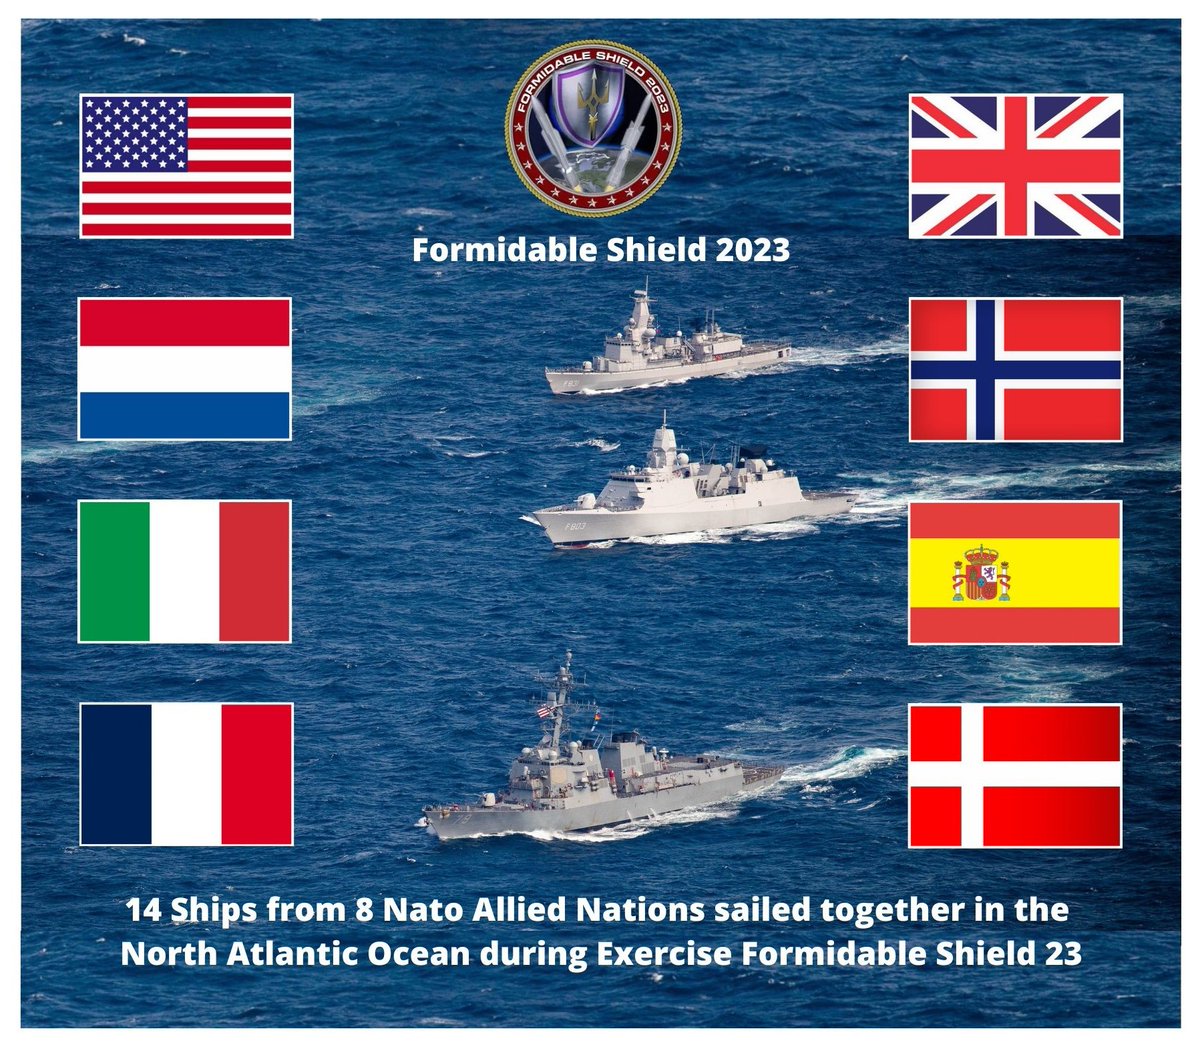 14 Ships from 8 Nato Allied Nations sailed together in the North Atlantic during Exercise Formidable Shield 23.
Photo's via : @SurfaceWarriors , @NATO_MARCOM , @COM_SNMG1 , @kon_marine , @wilco_faber , @Jaringma , @navyboy68 , @MarcoNaron